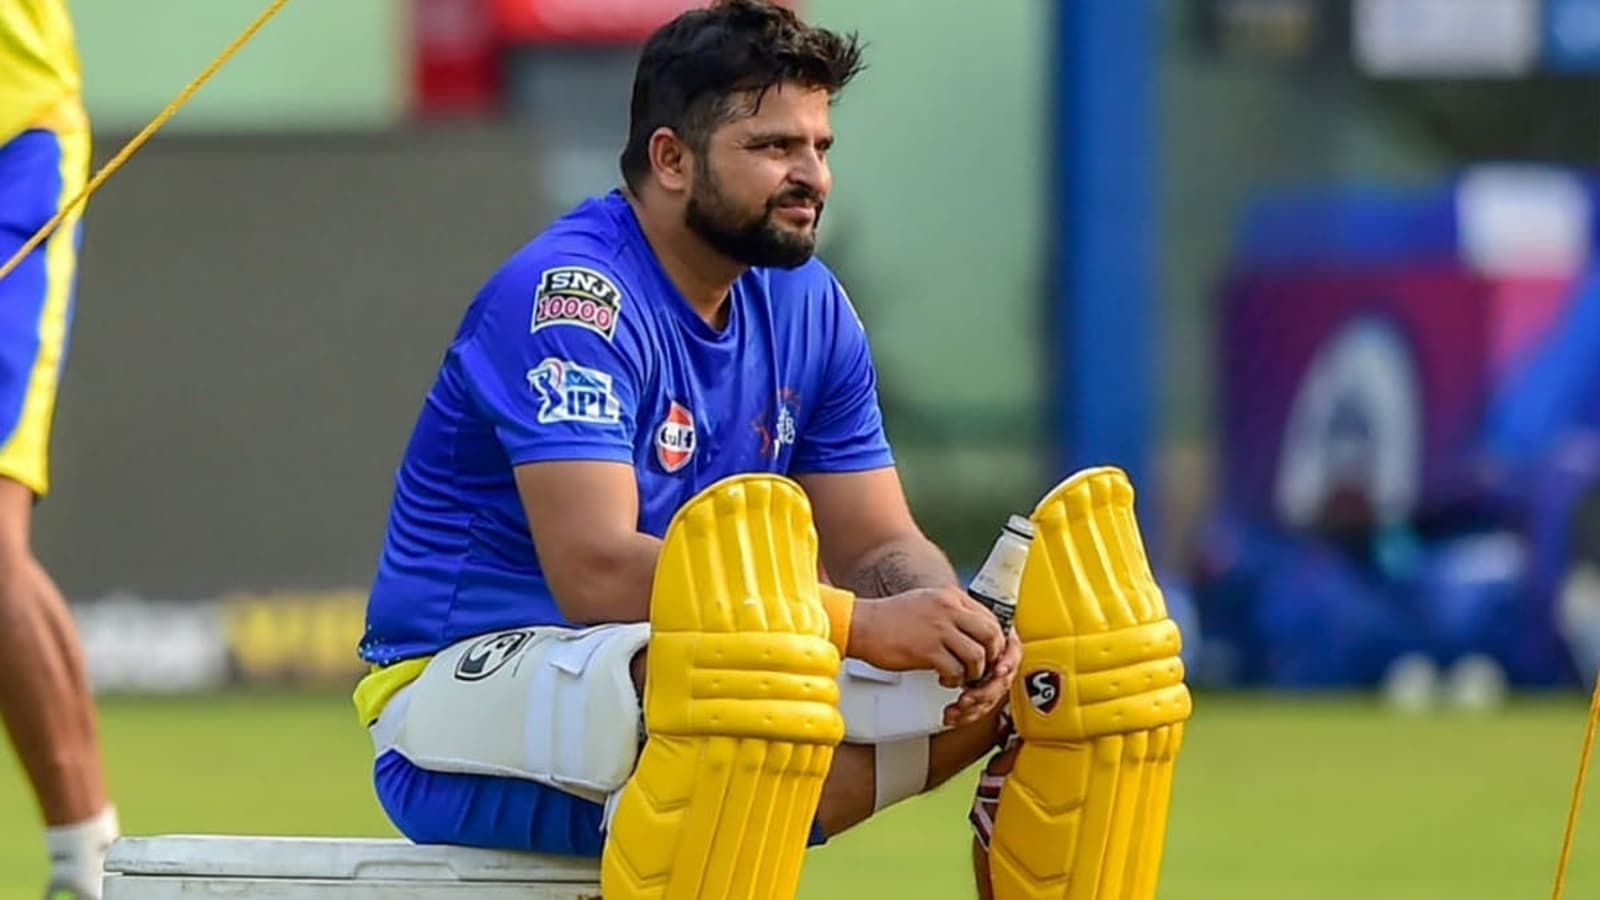 He told us two days back...': CSK CEO lifts lid on Suresh Raina's ...